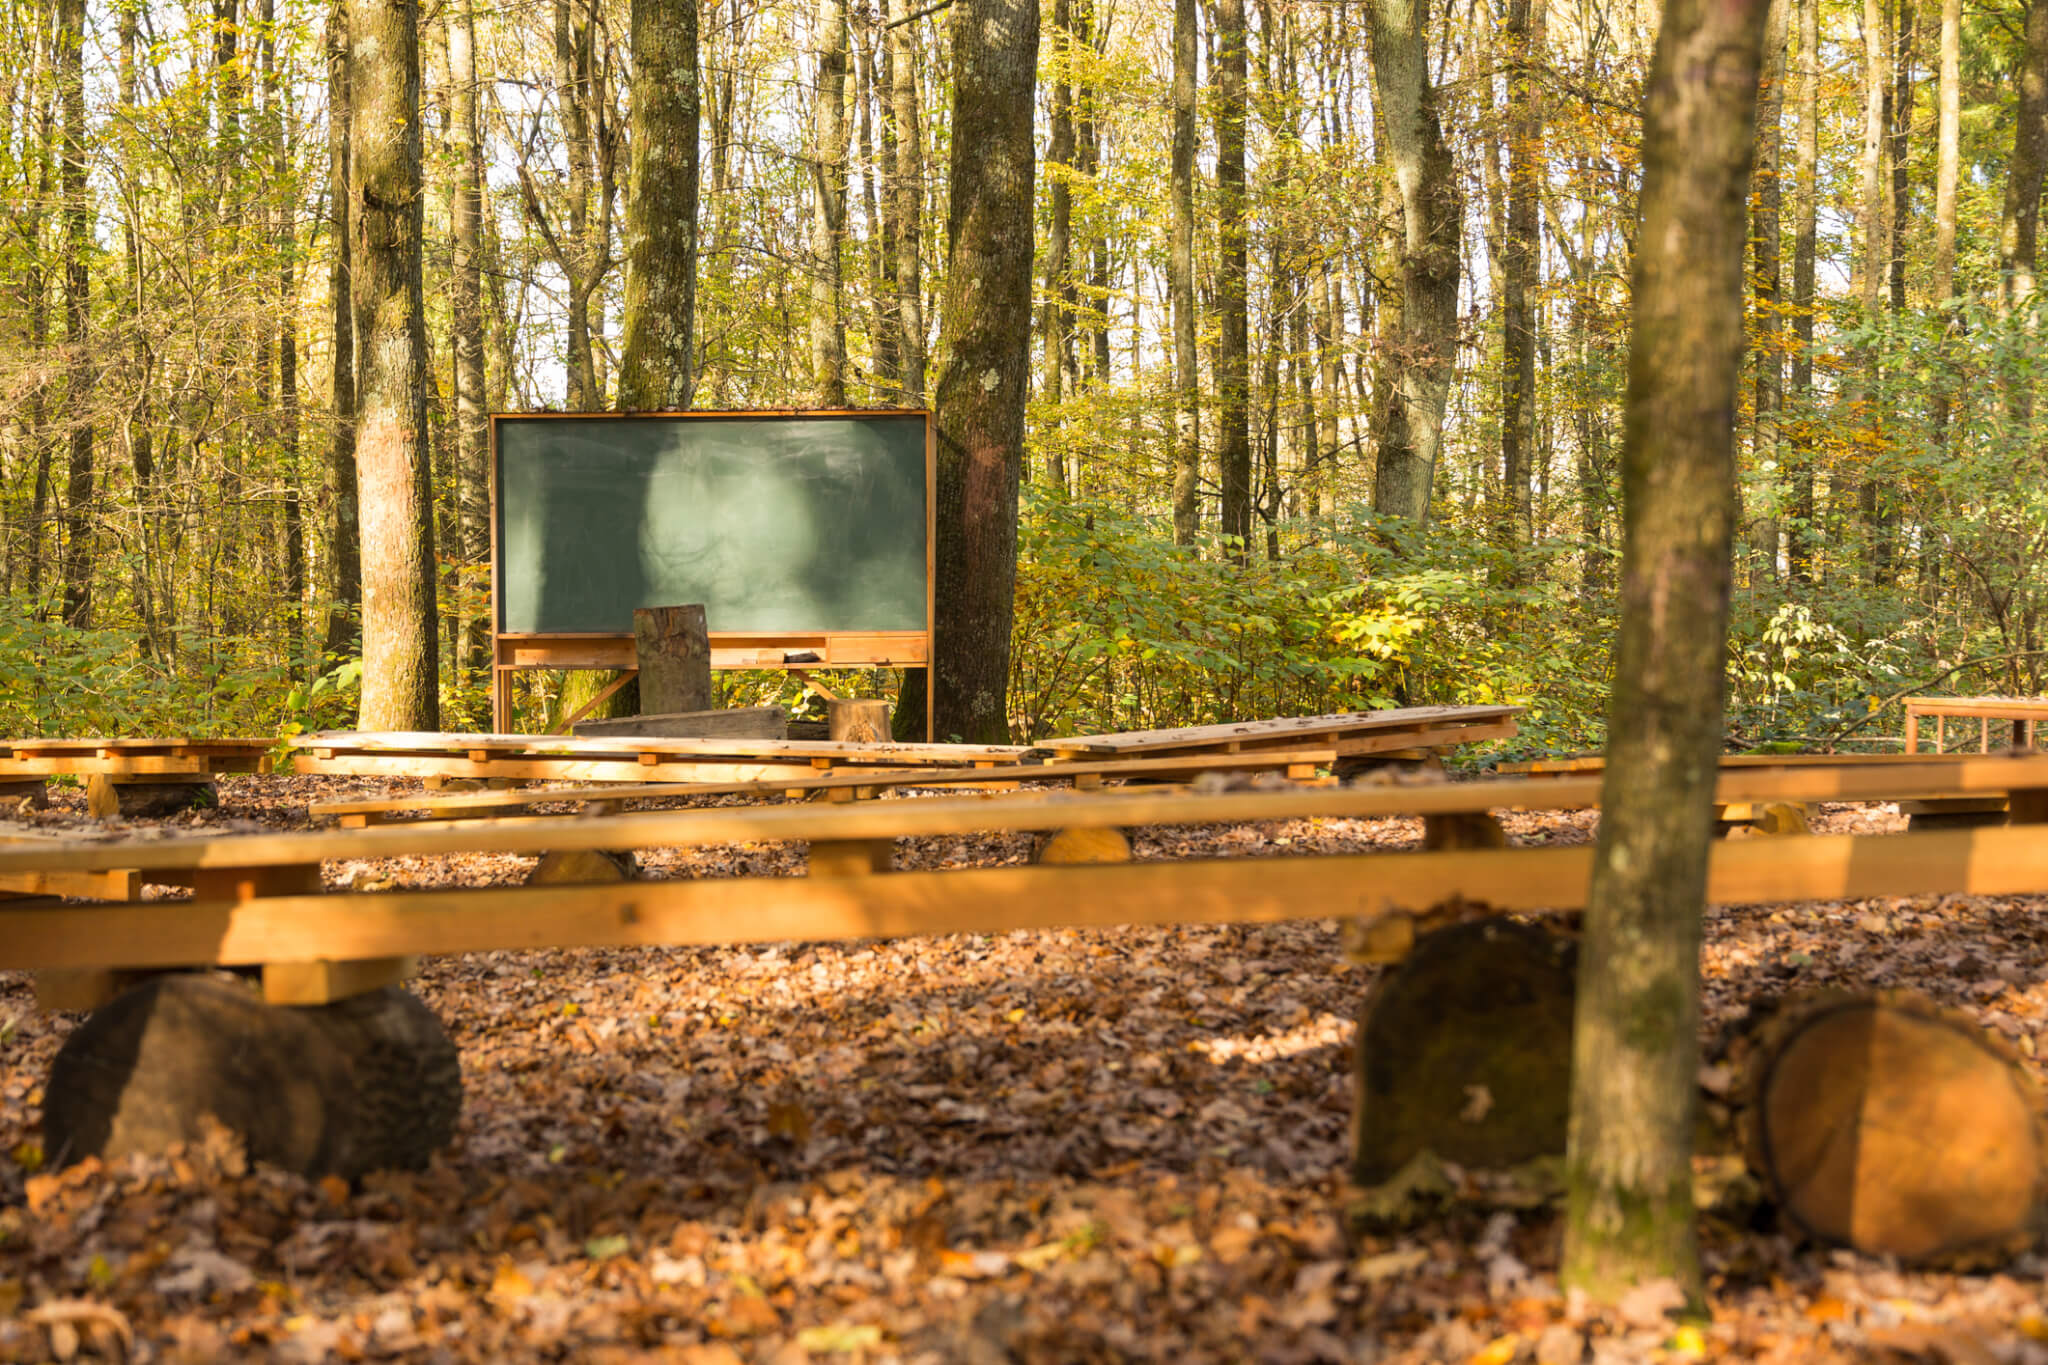 Empty outdoor class room in forest with blank classic green chalk board, school desks and benches for students with trees as backdrop and brown autumn colour leaves on ground. Picture meant to illustrate outdoor education and how it helps building positive youth-adult relationships.